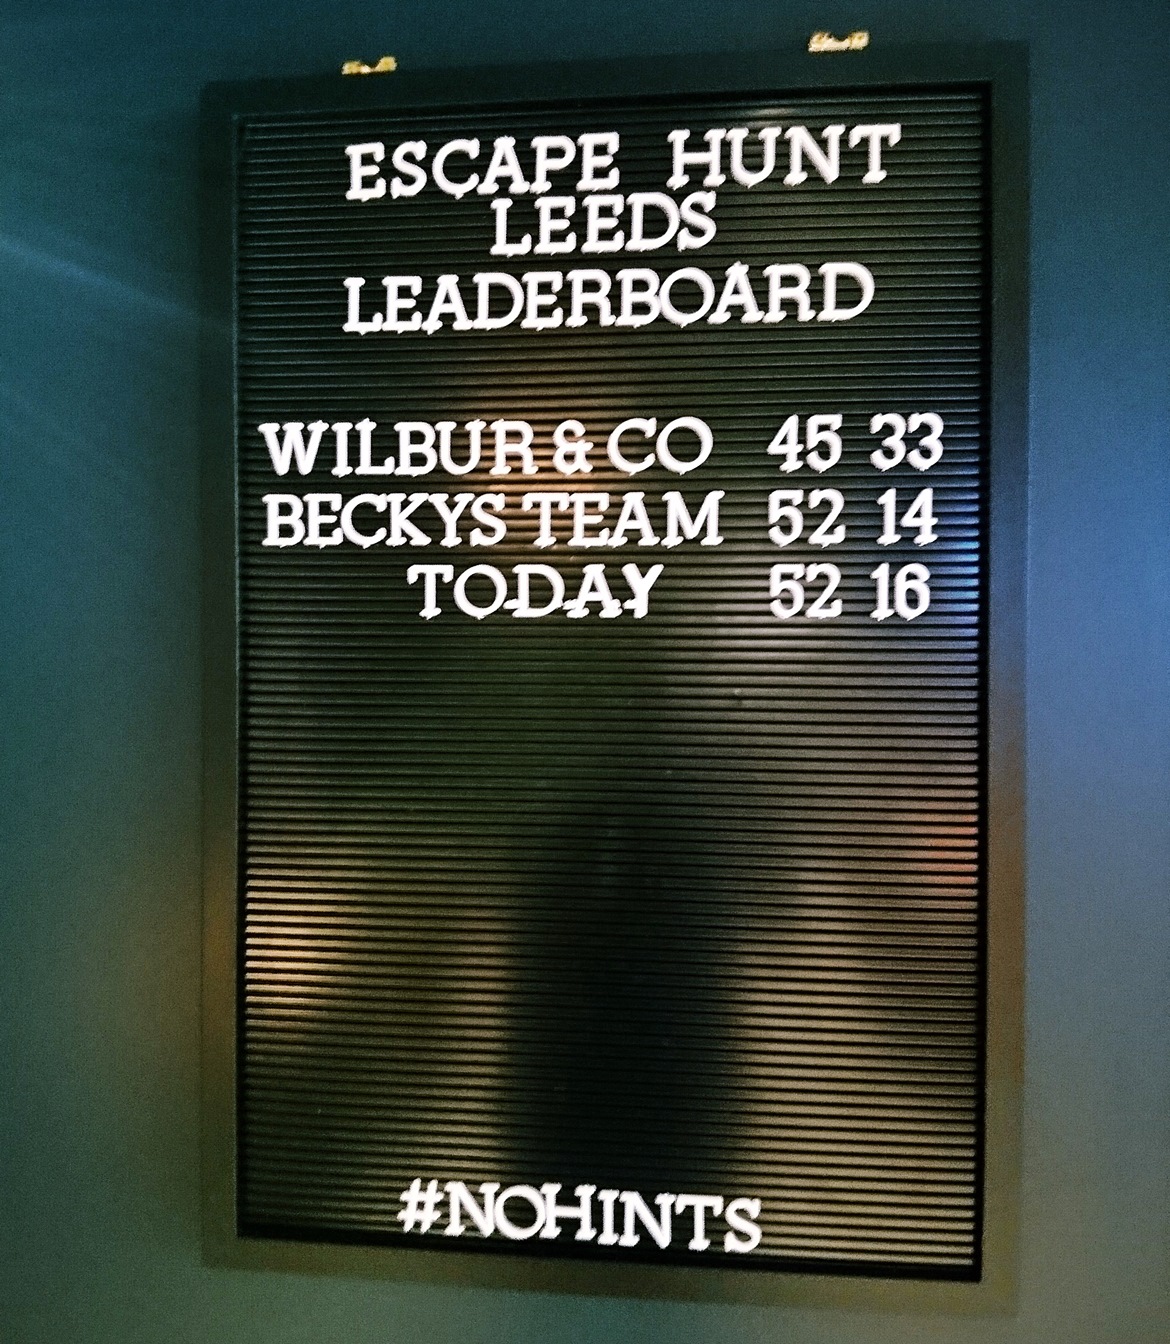 Top 3 leader board after - Our Finest Hour, escape room by Escape Hunt Leeds, review by BeckyBecky Blogs